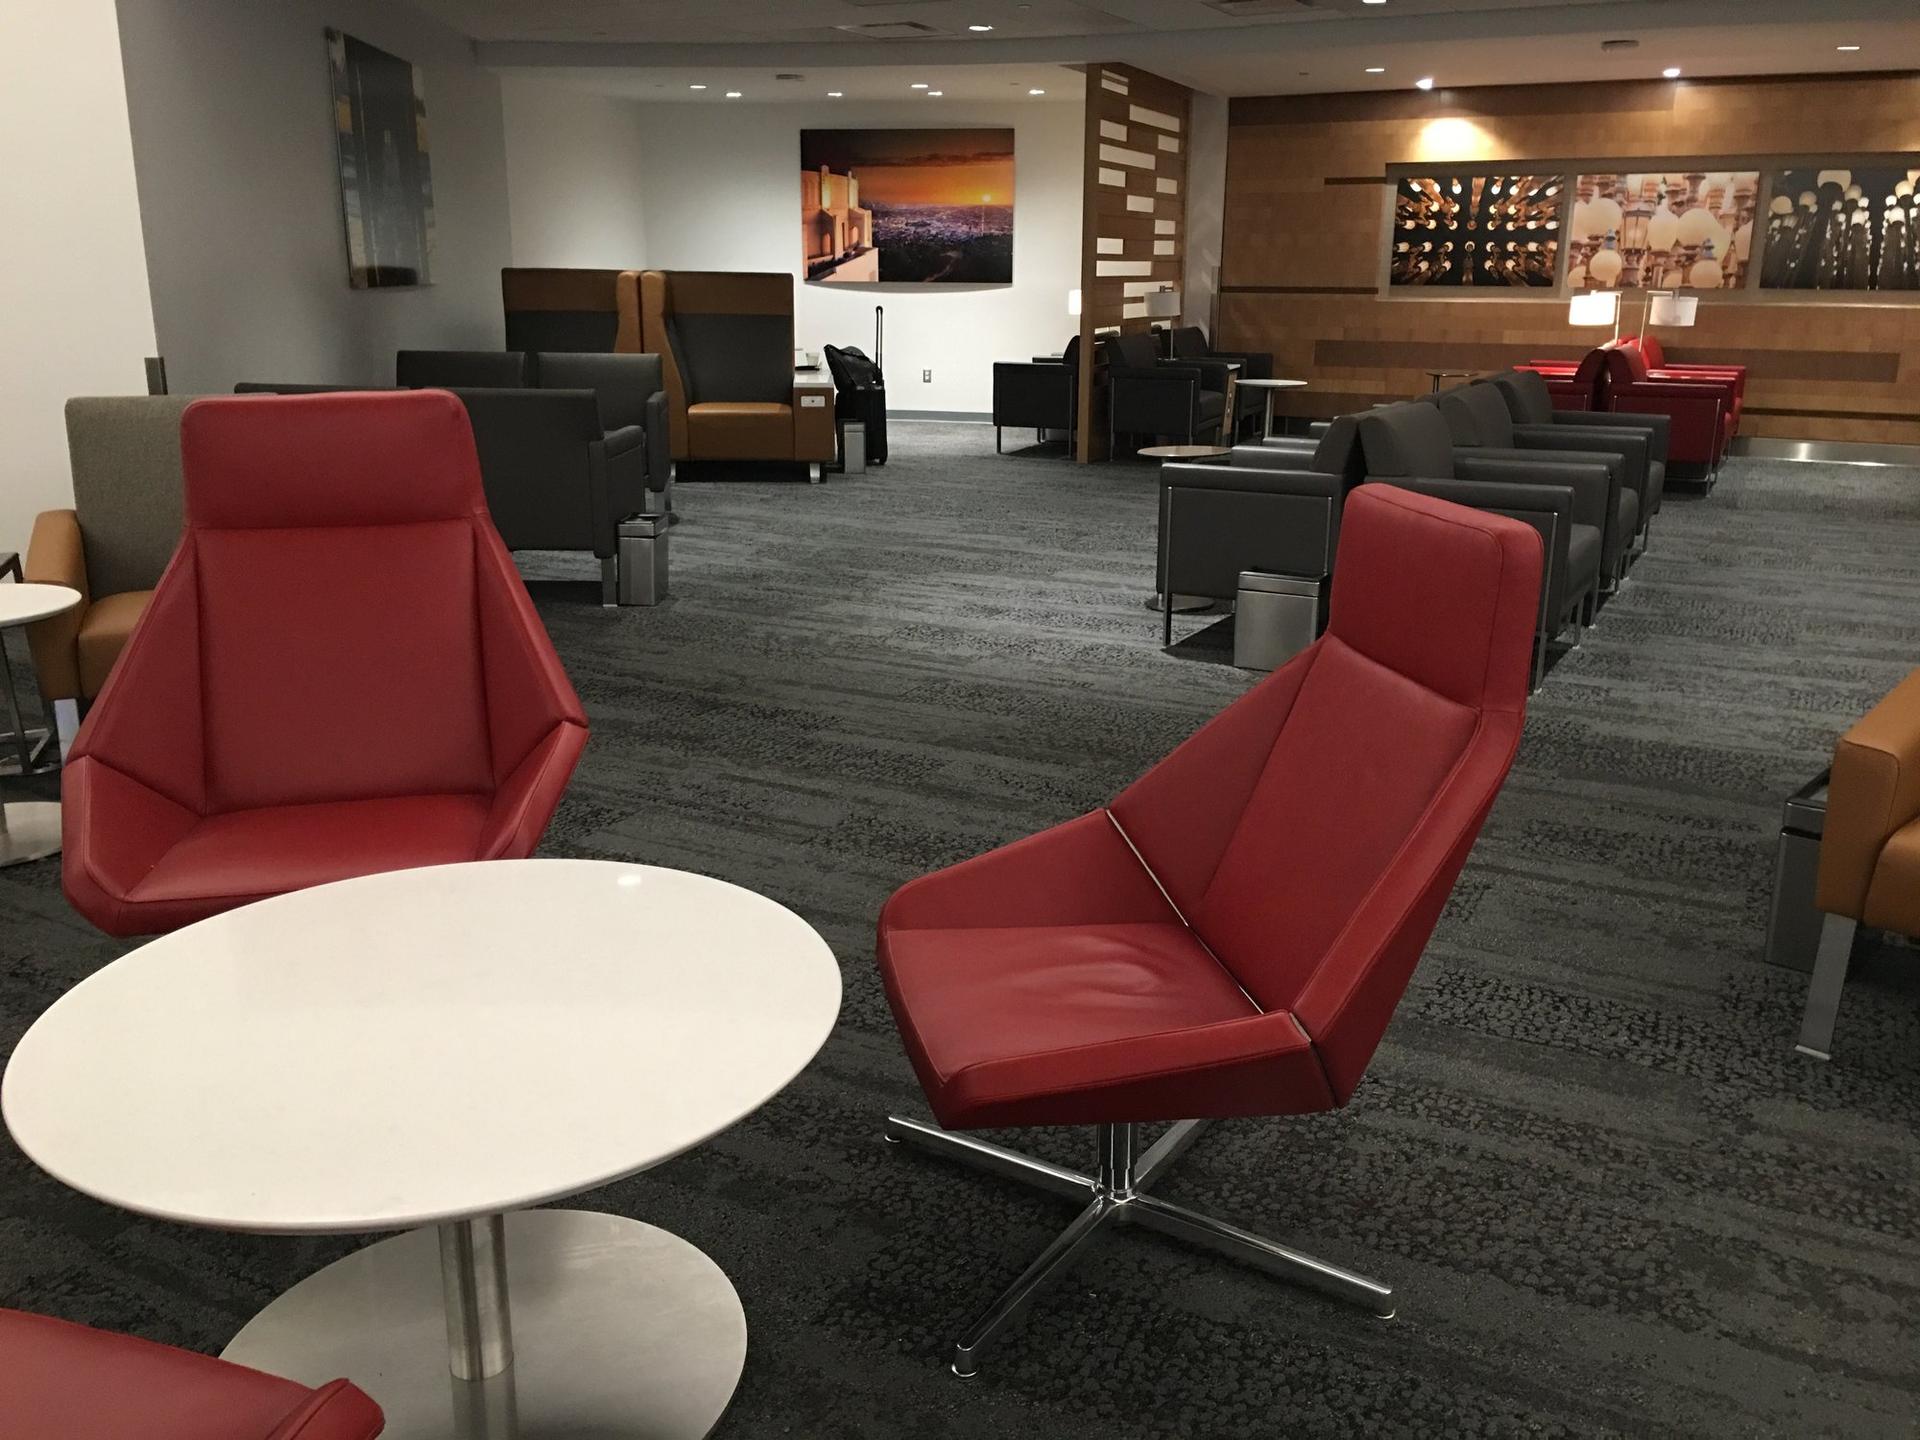 American Airlines Admirals Club image 7 of 38